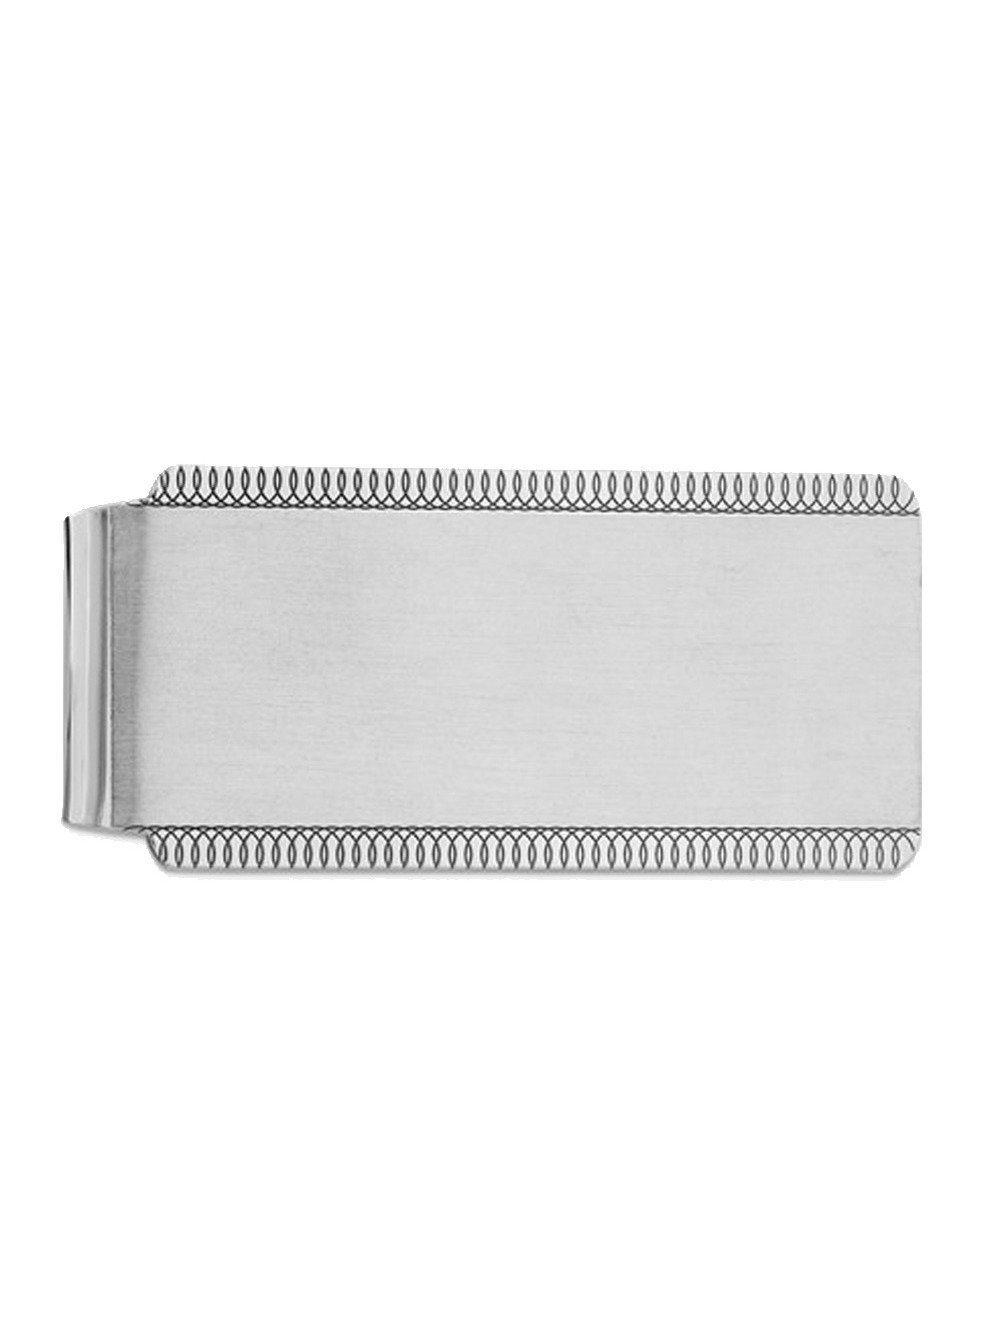 Mens Rhodium-Plated Satin Money Clip in Sterling Silver - image 3 of 3